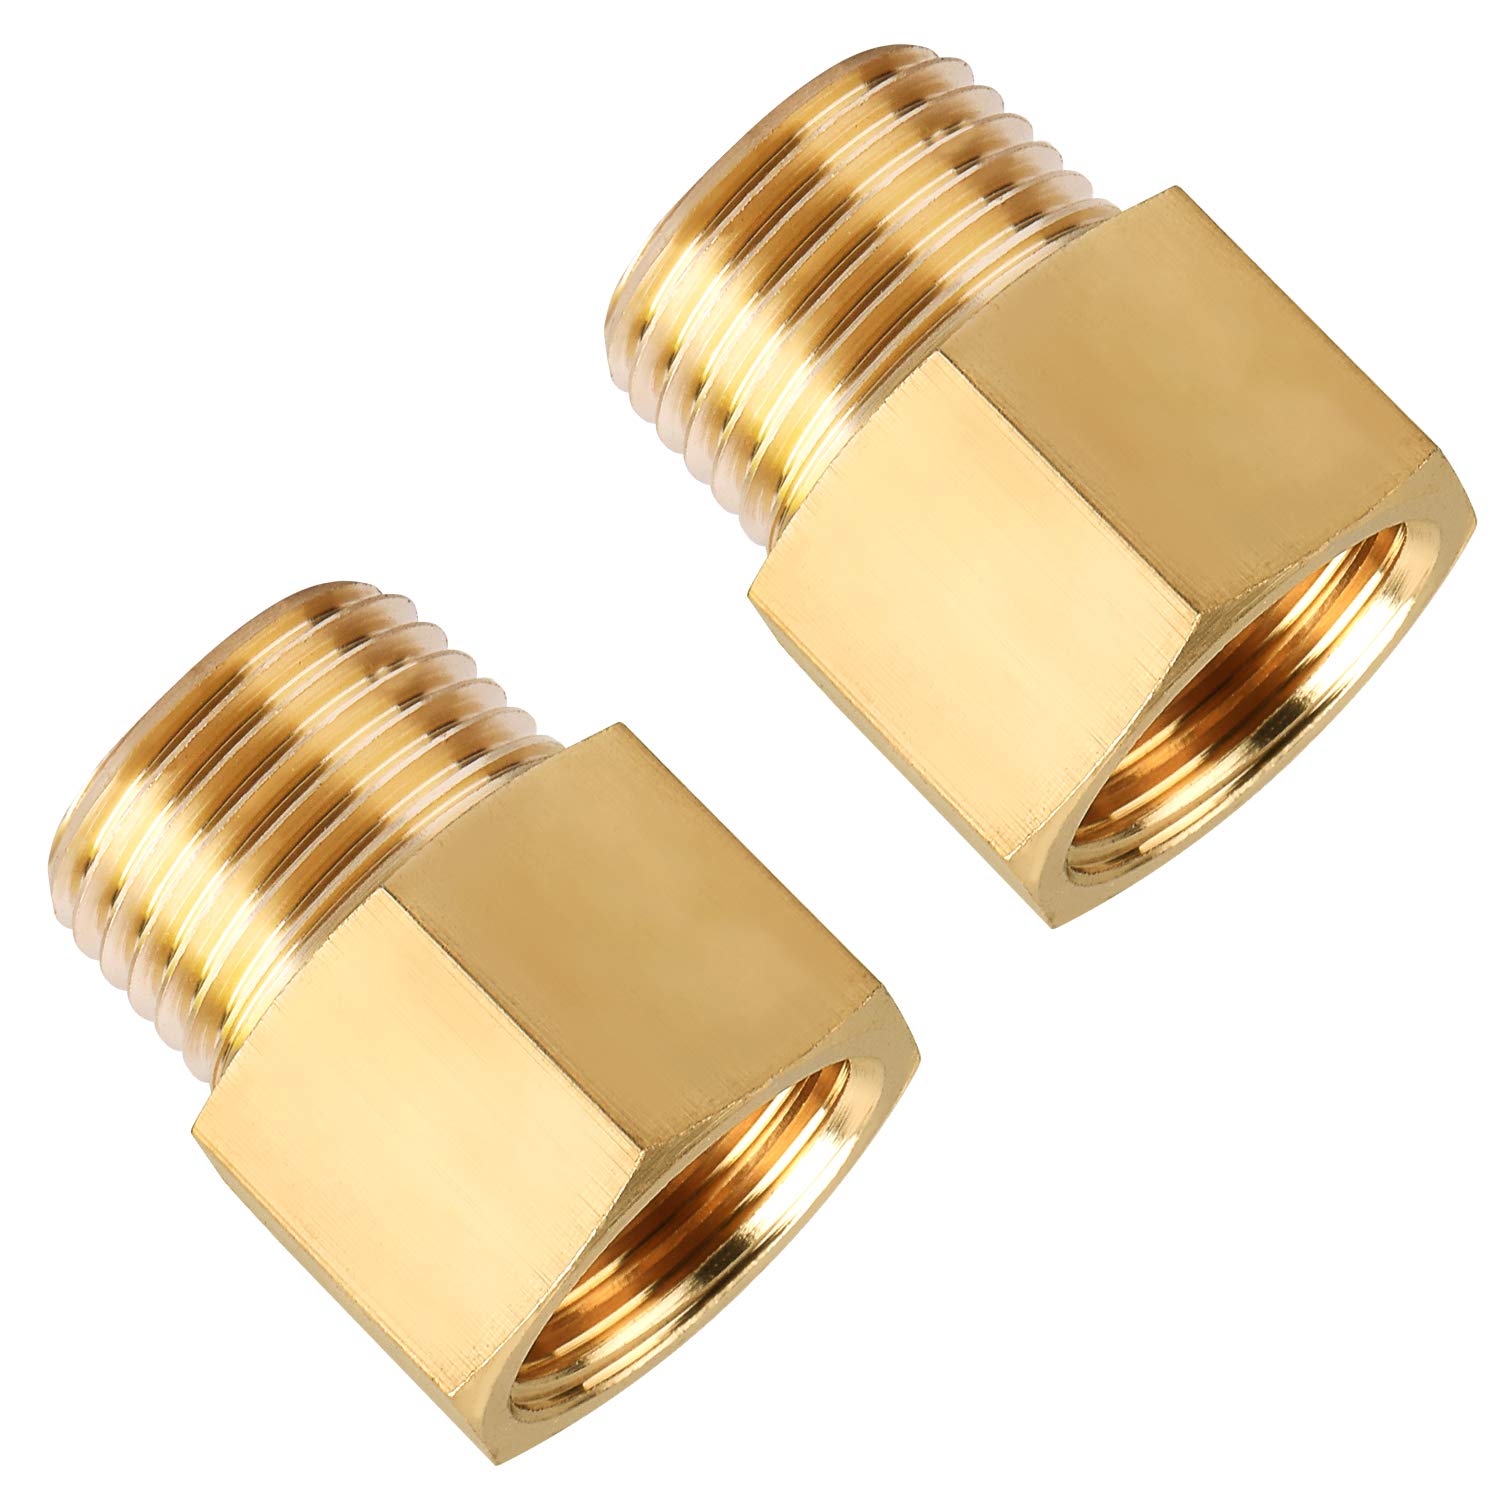 Brass Extension Fittings